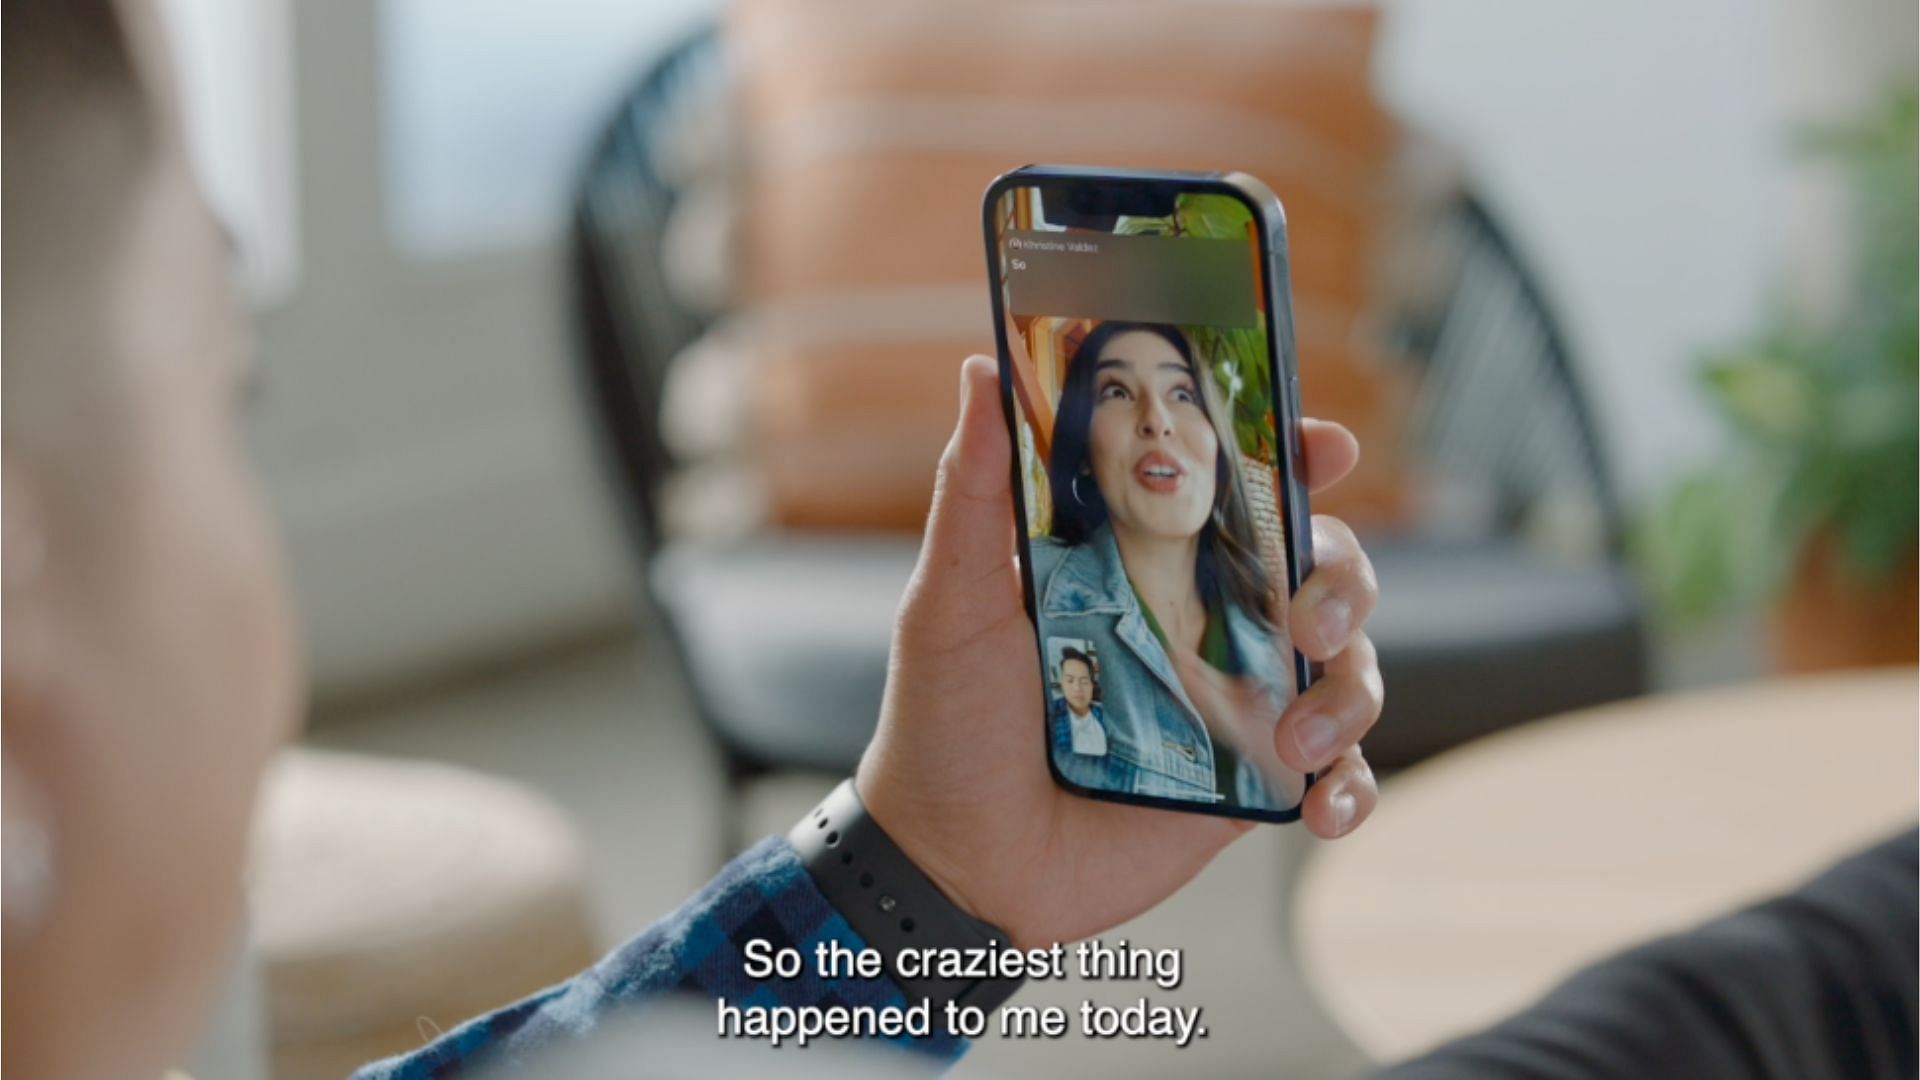 Live Captions brings subtitles for all audio content on Apple devices. (Image via Apple)